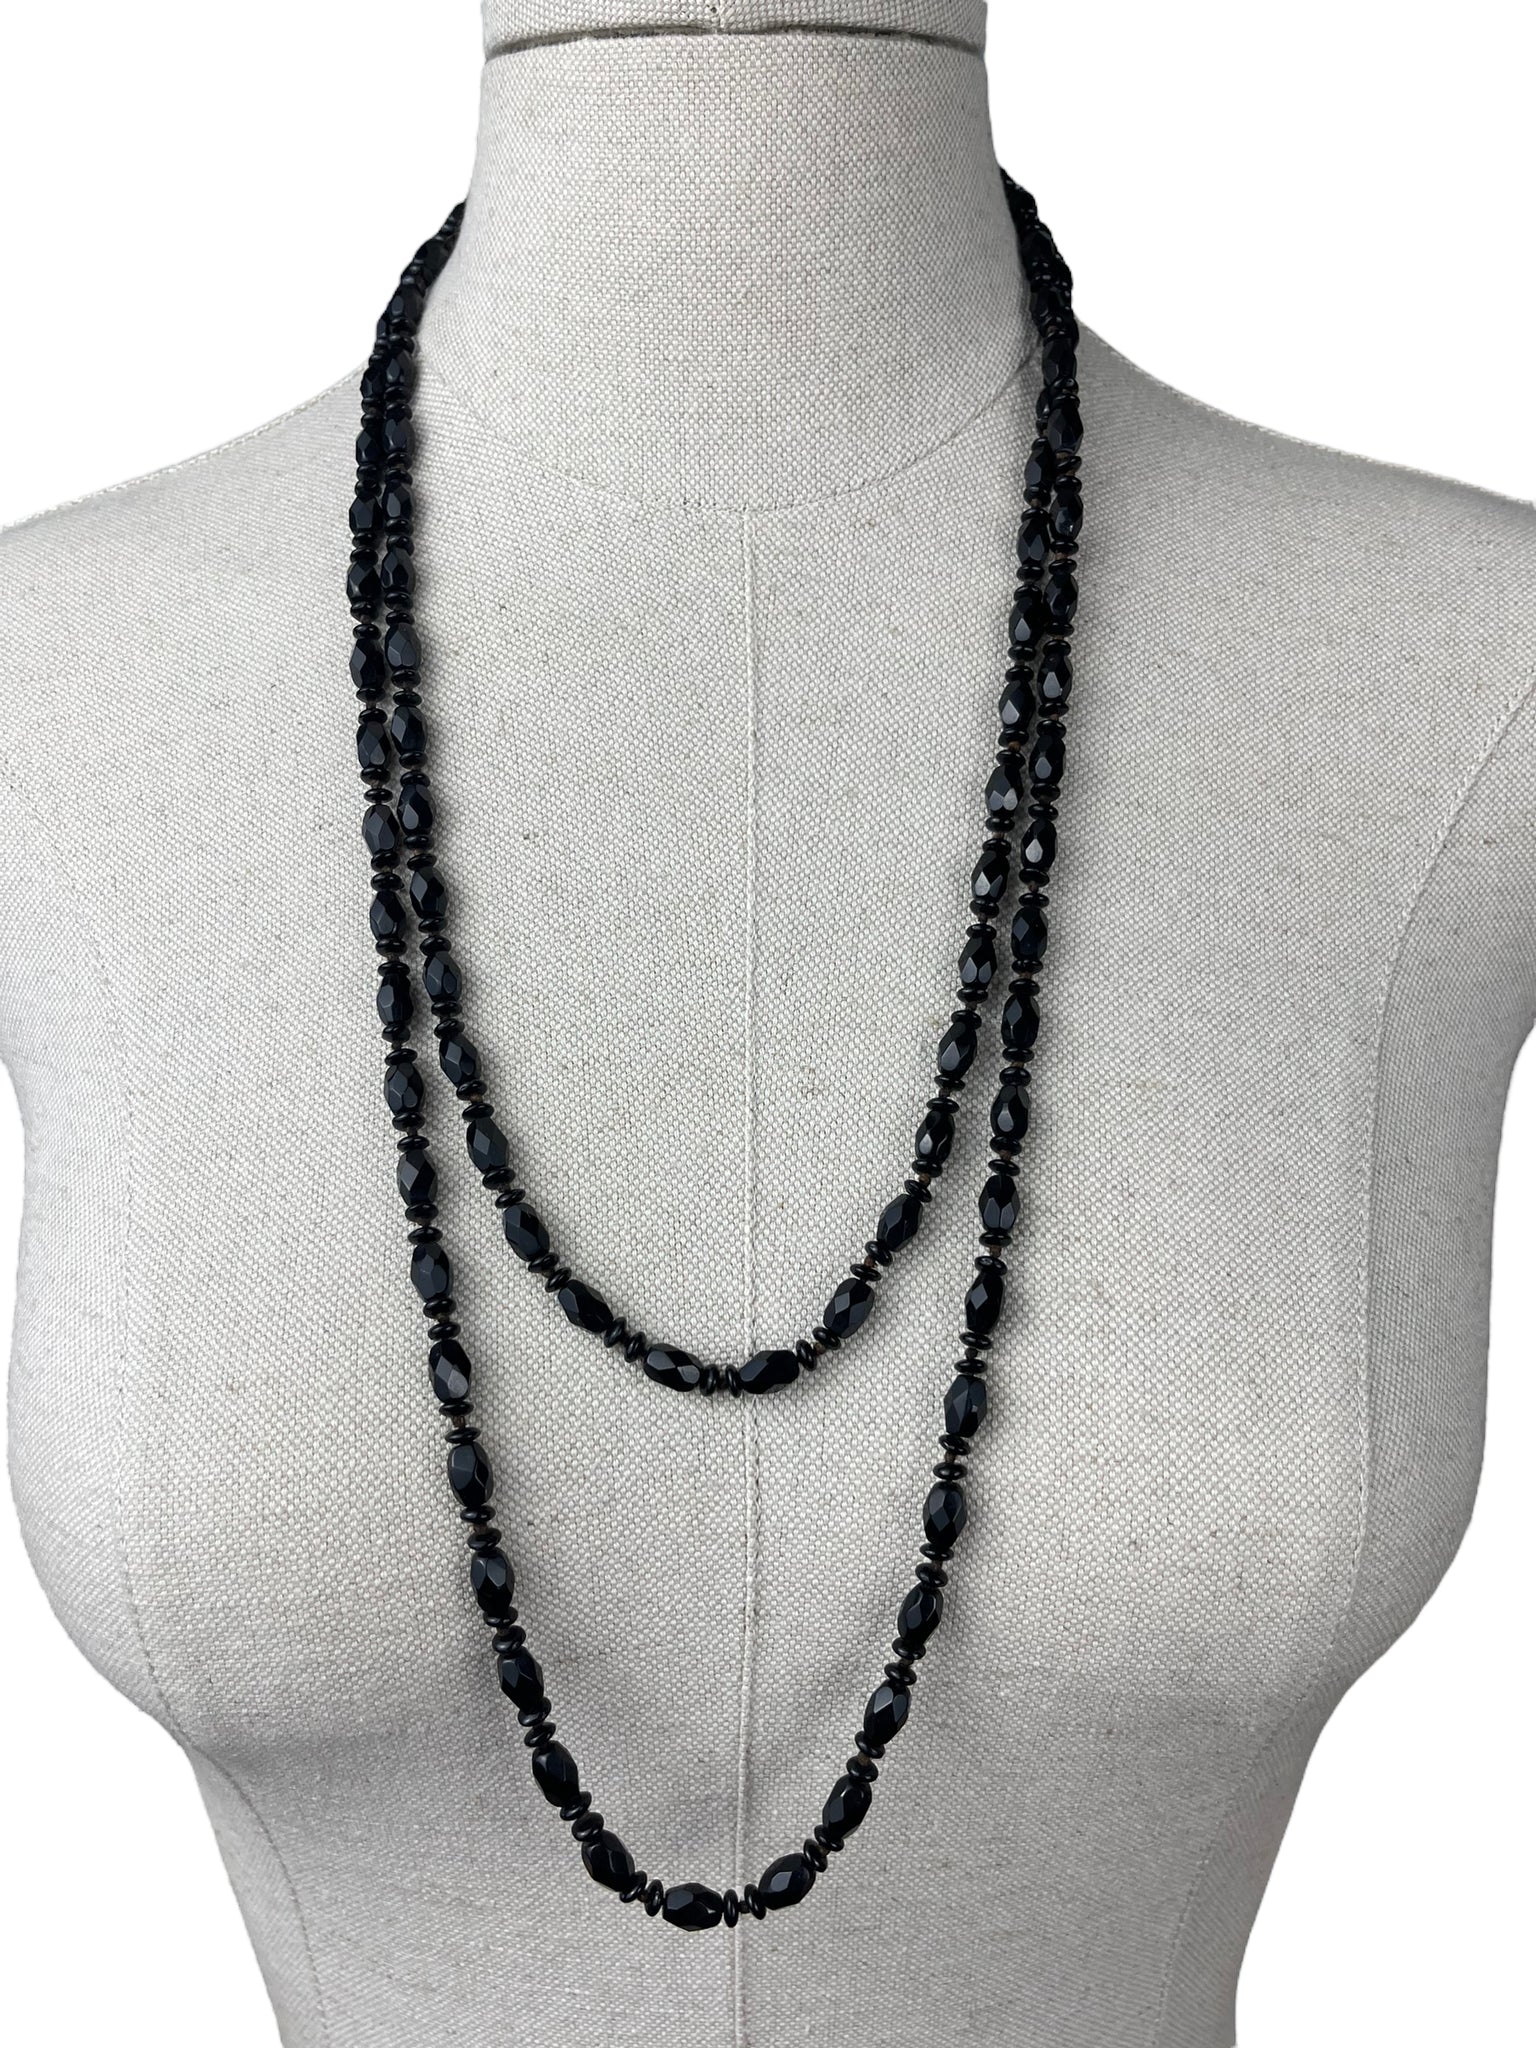 Black on Black Murano Glass Beads Necklace Shiny and Opaque 22 Inches w/2.5  Inch Extender